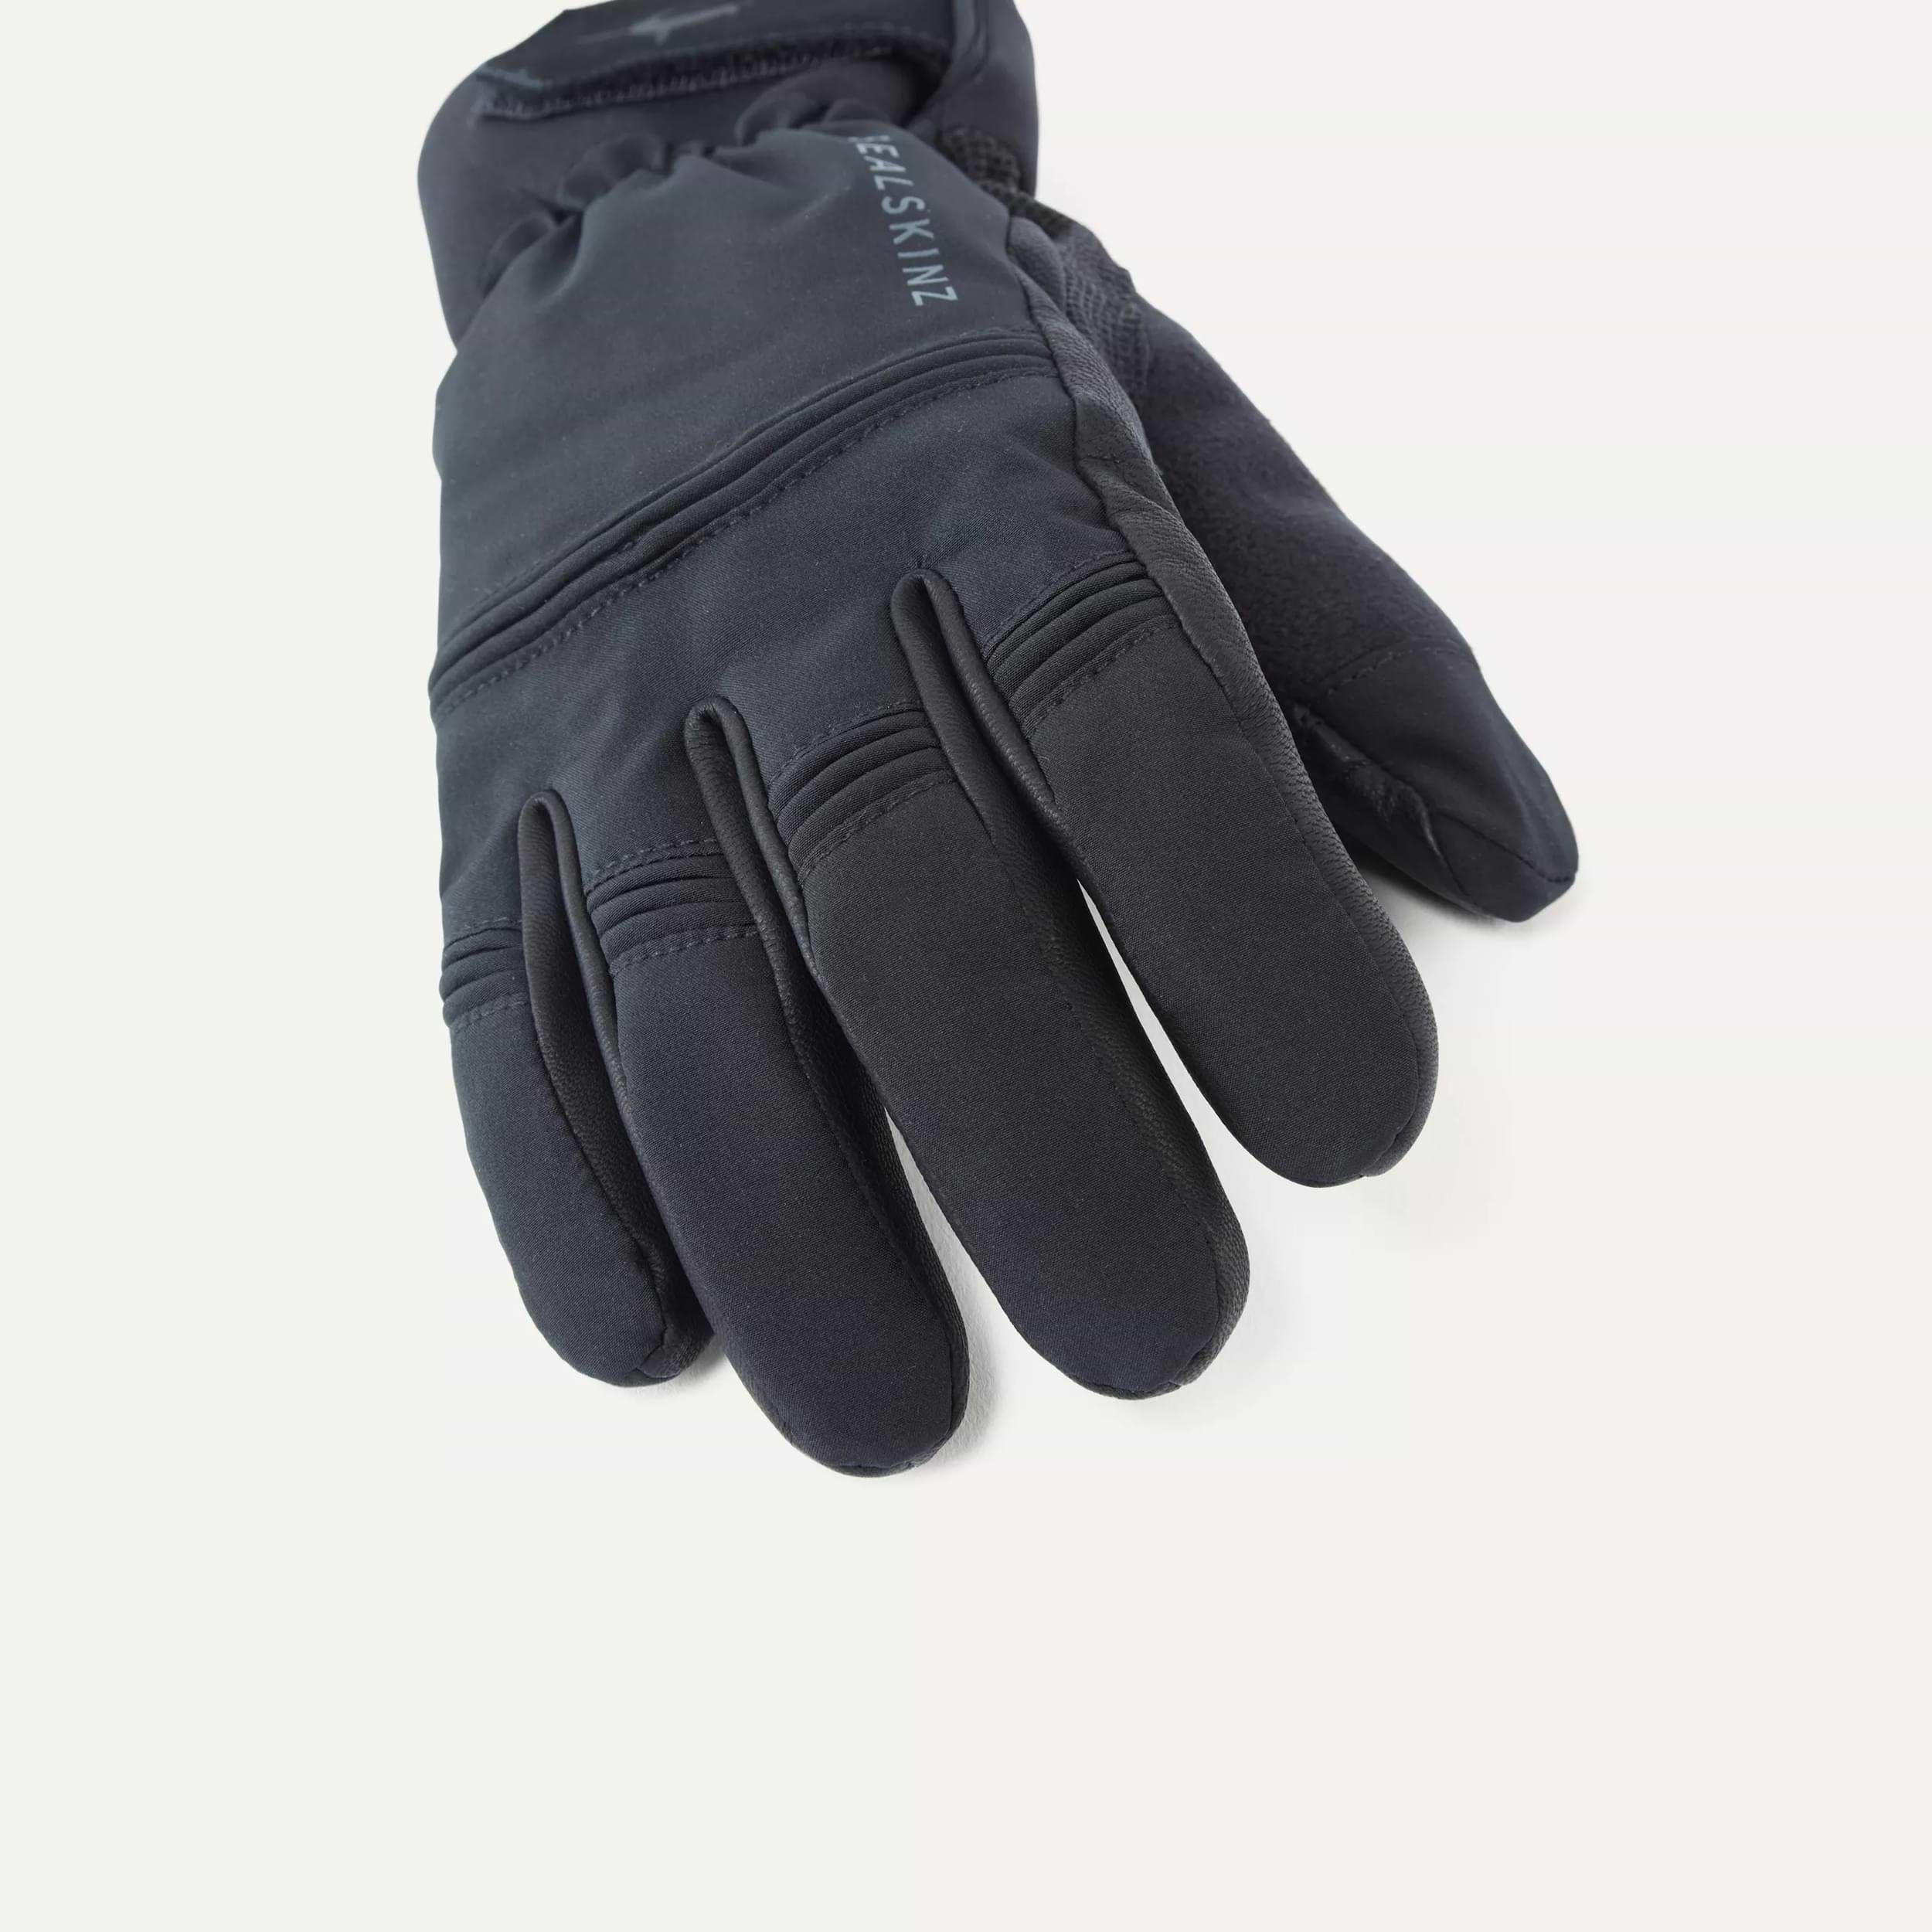 Winter Motorcycle Glove, Waterproof Cycling Gloves, Insulated Motorcycle  Gloves, Soft Cold Weather Cycling Gloves, Thermal motorcycle Gloves Winter